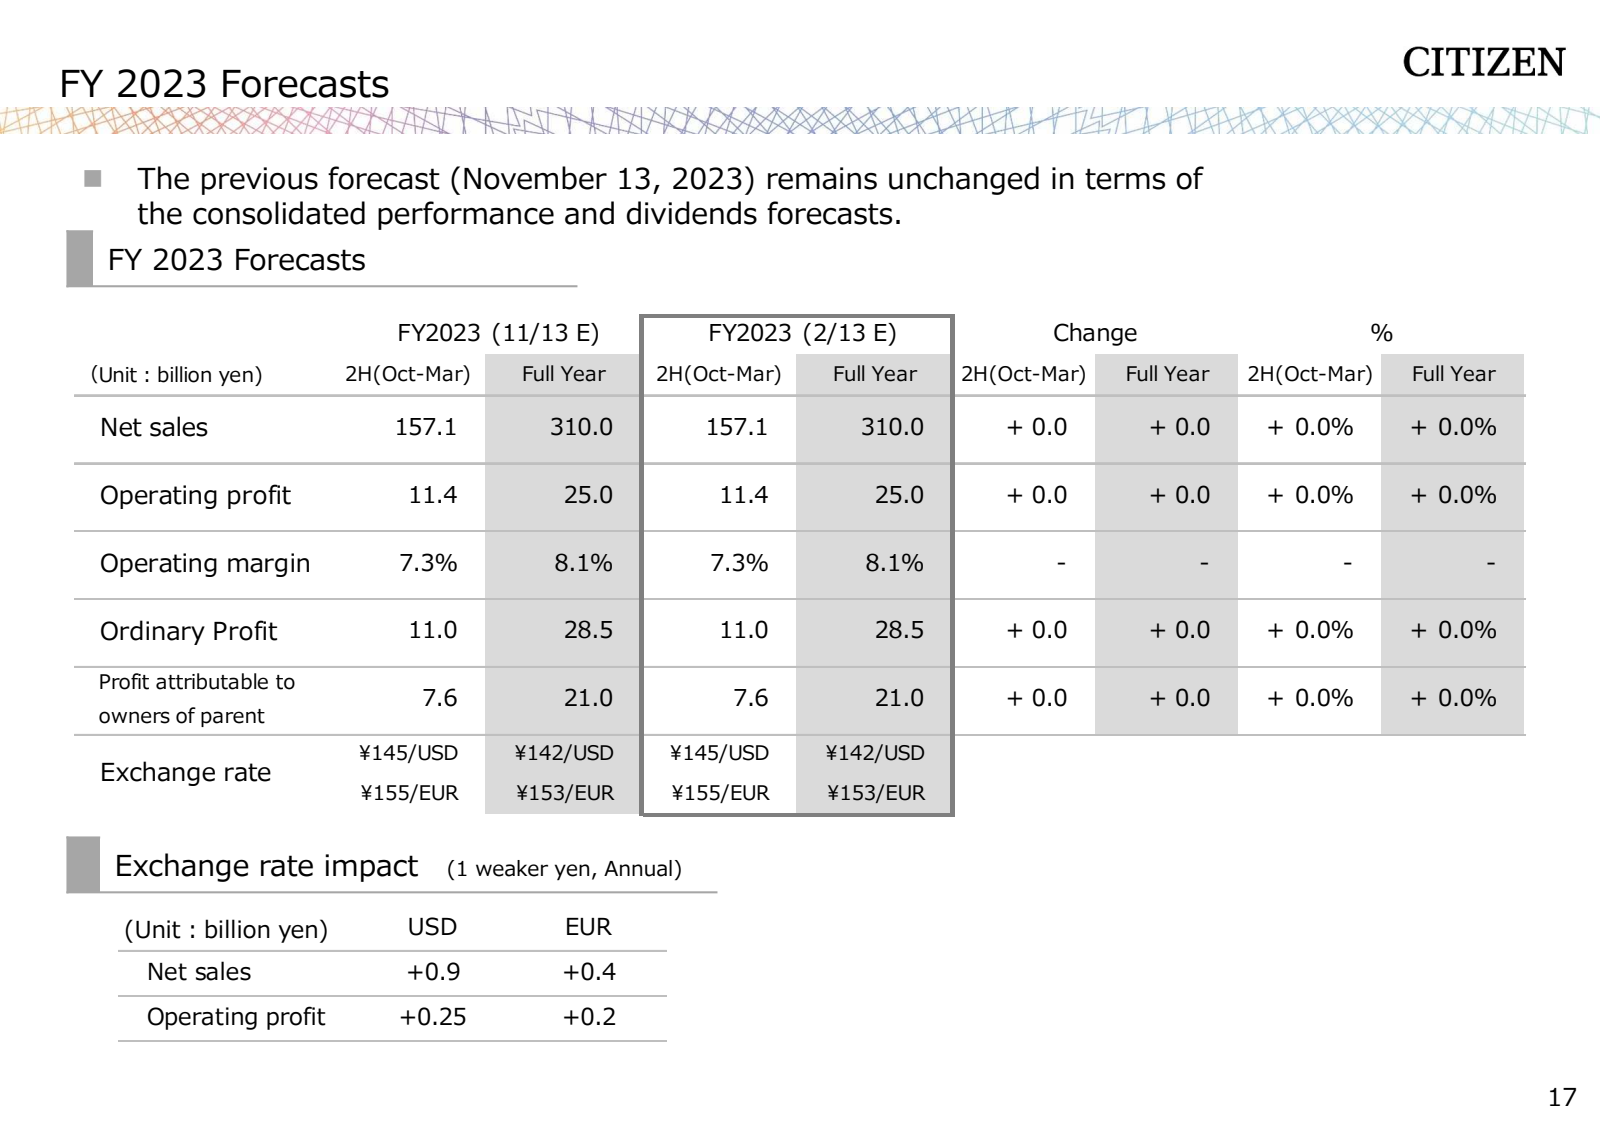 FY 2023 Forecasts 

